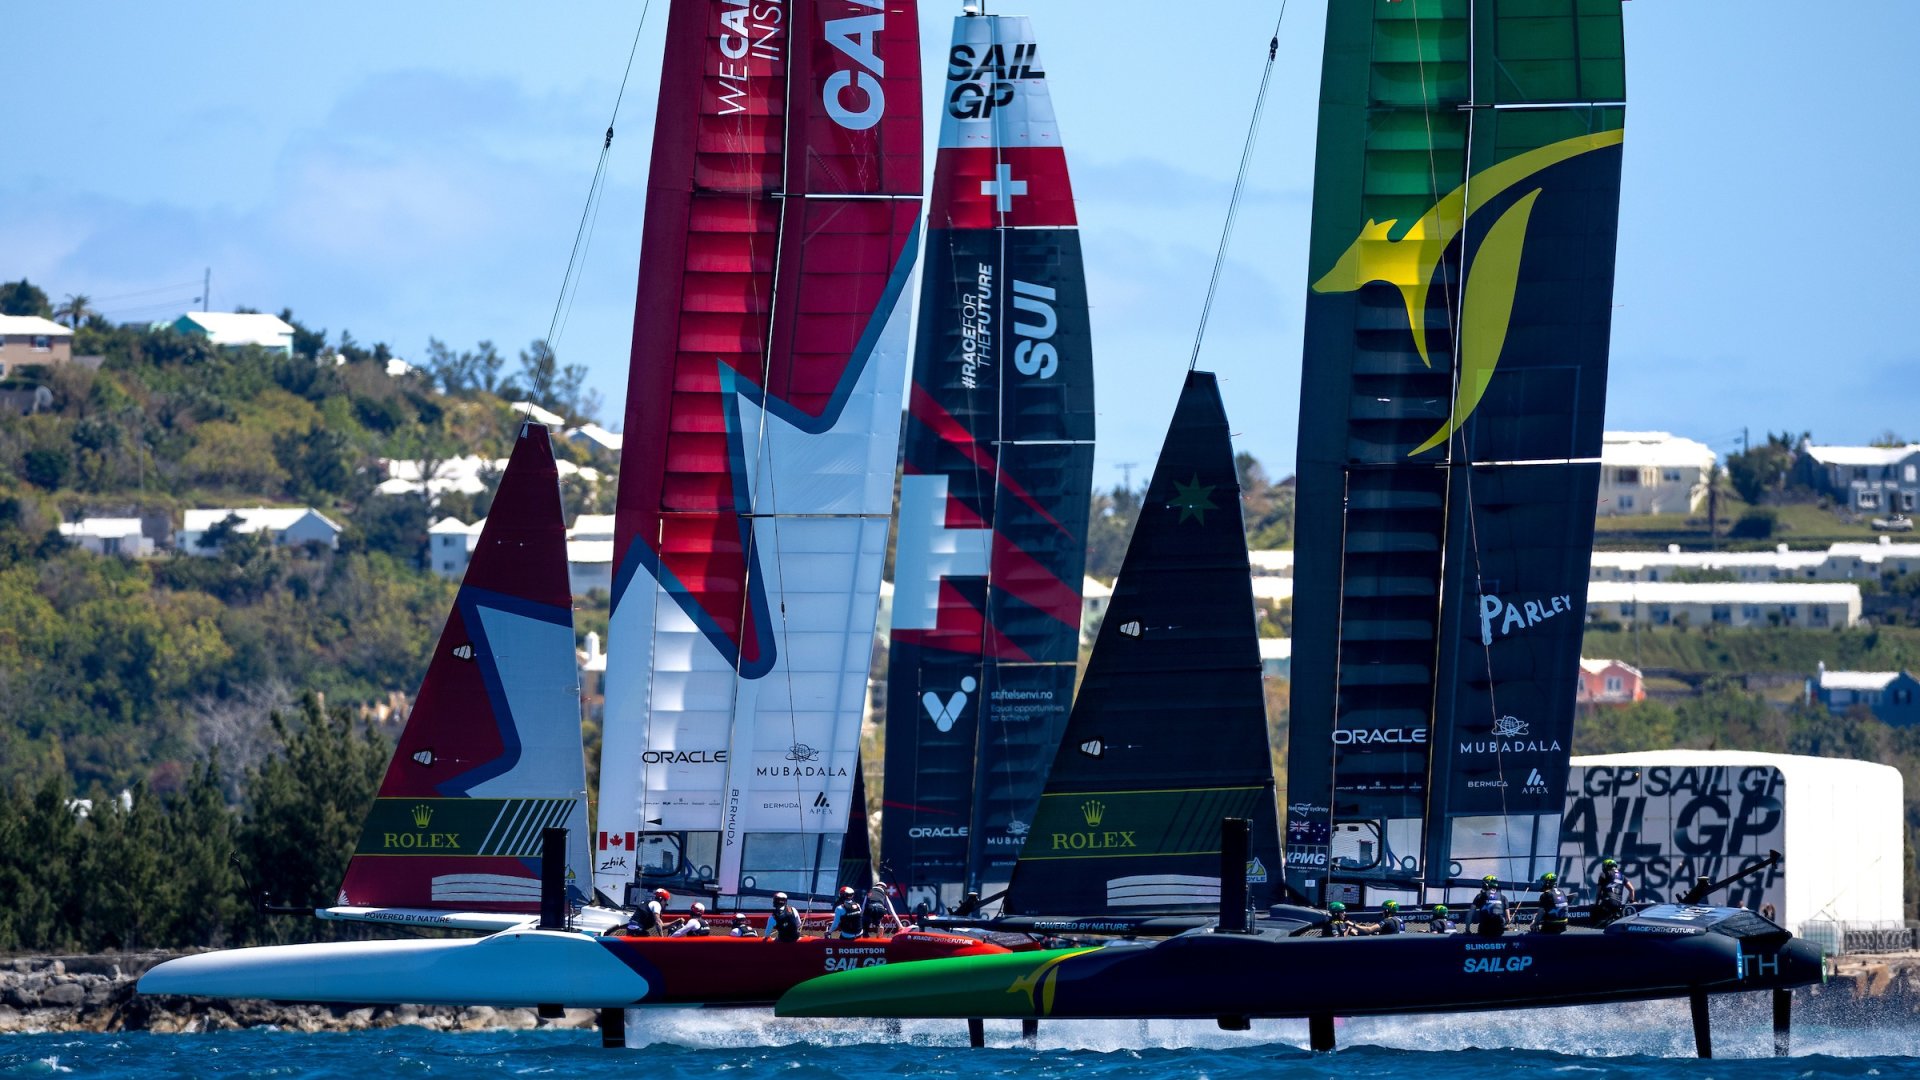 5 things to watch out for on day two of racing in Bermuda